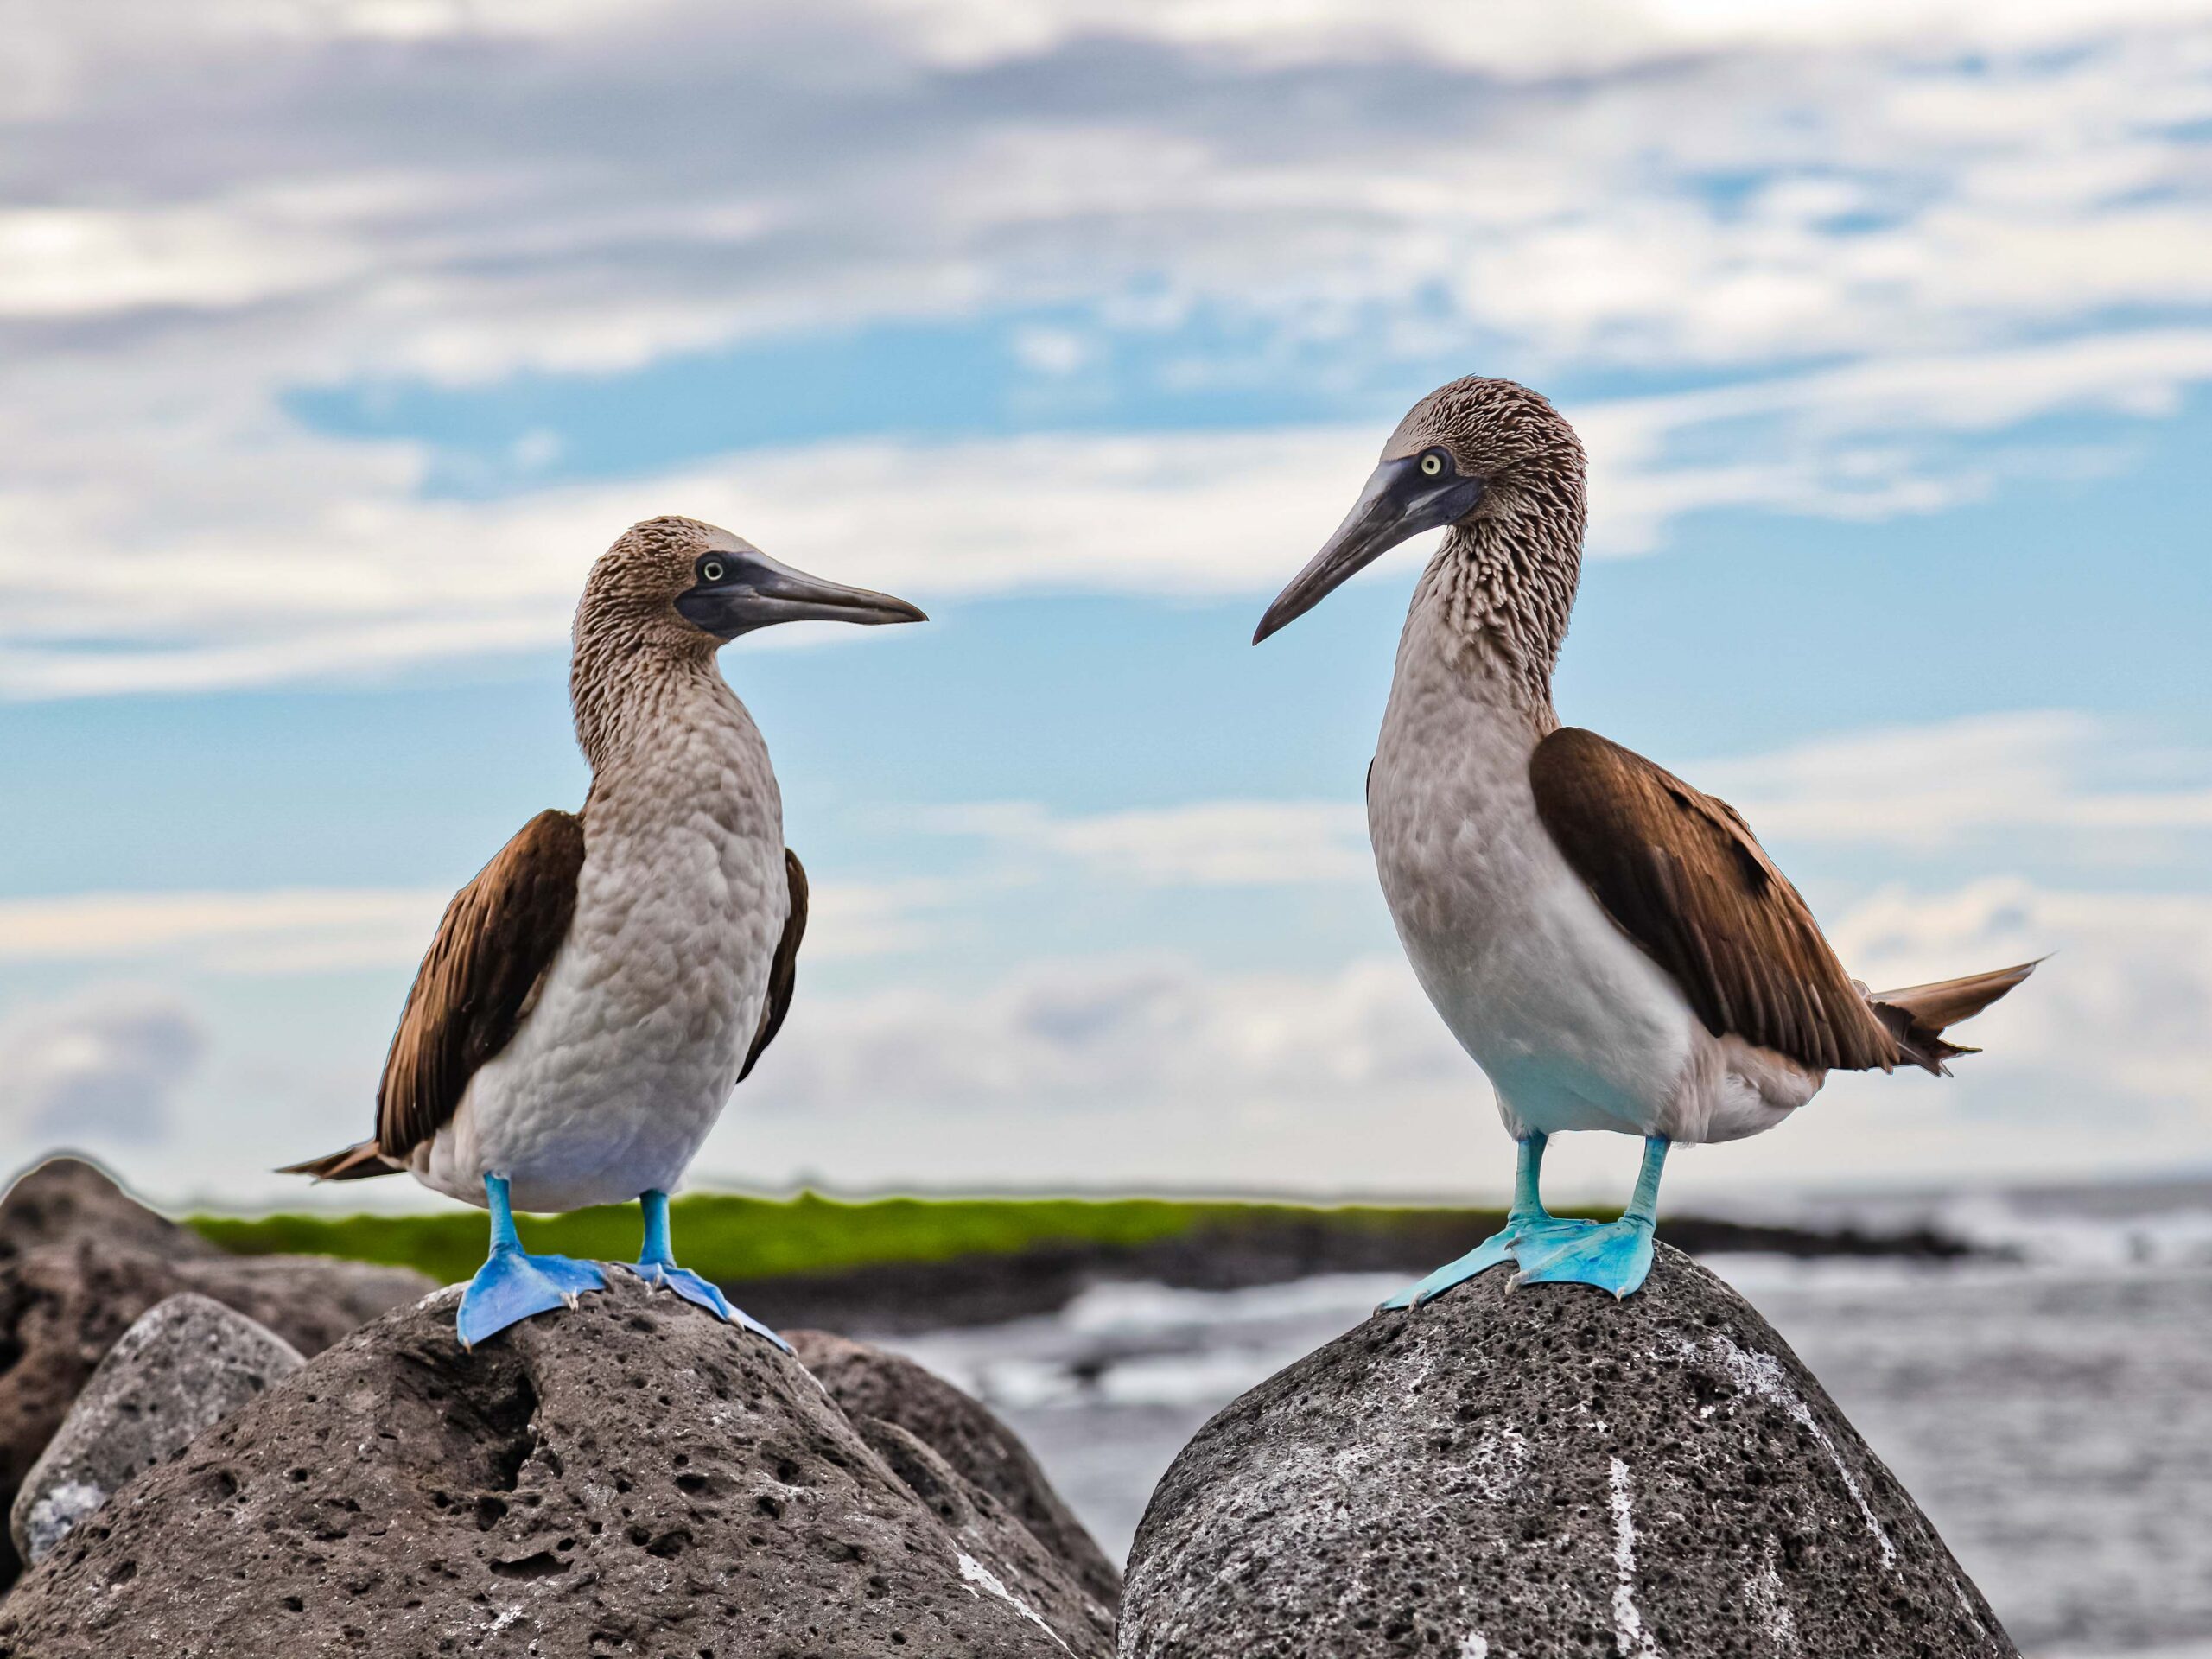 Blue-footed boobies on the Galapagos